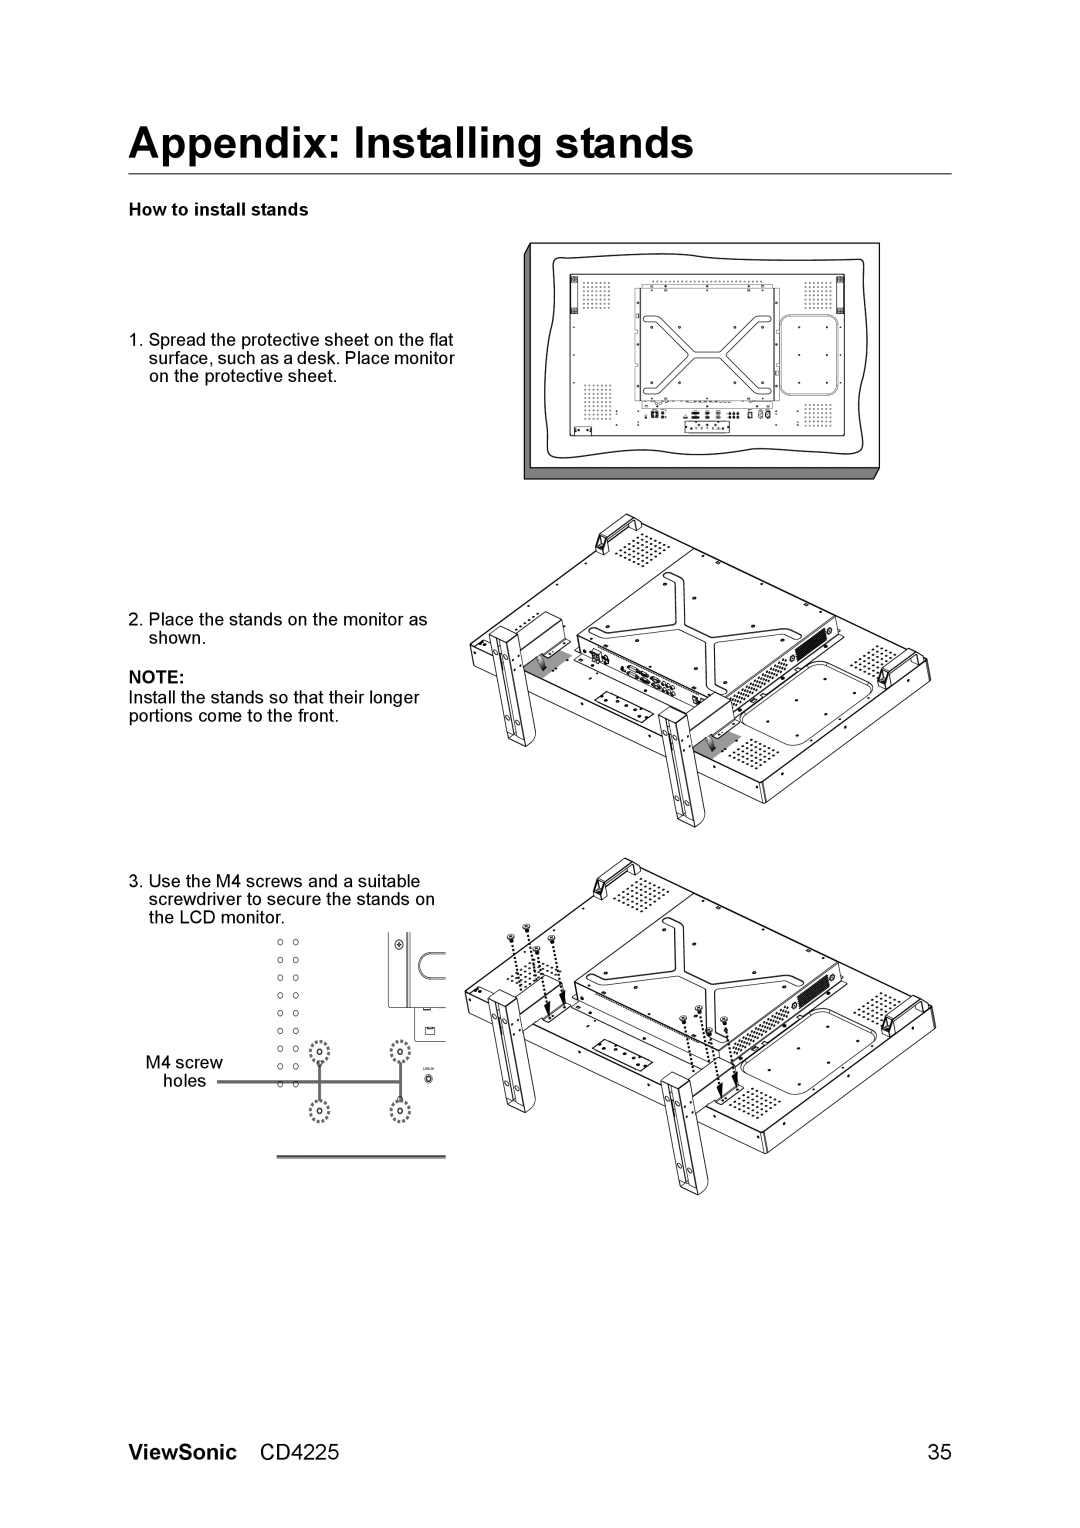 ViewSonic CD4225 manual Appendix Installing stands, How to install stands 